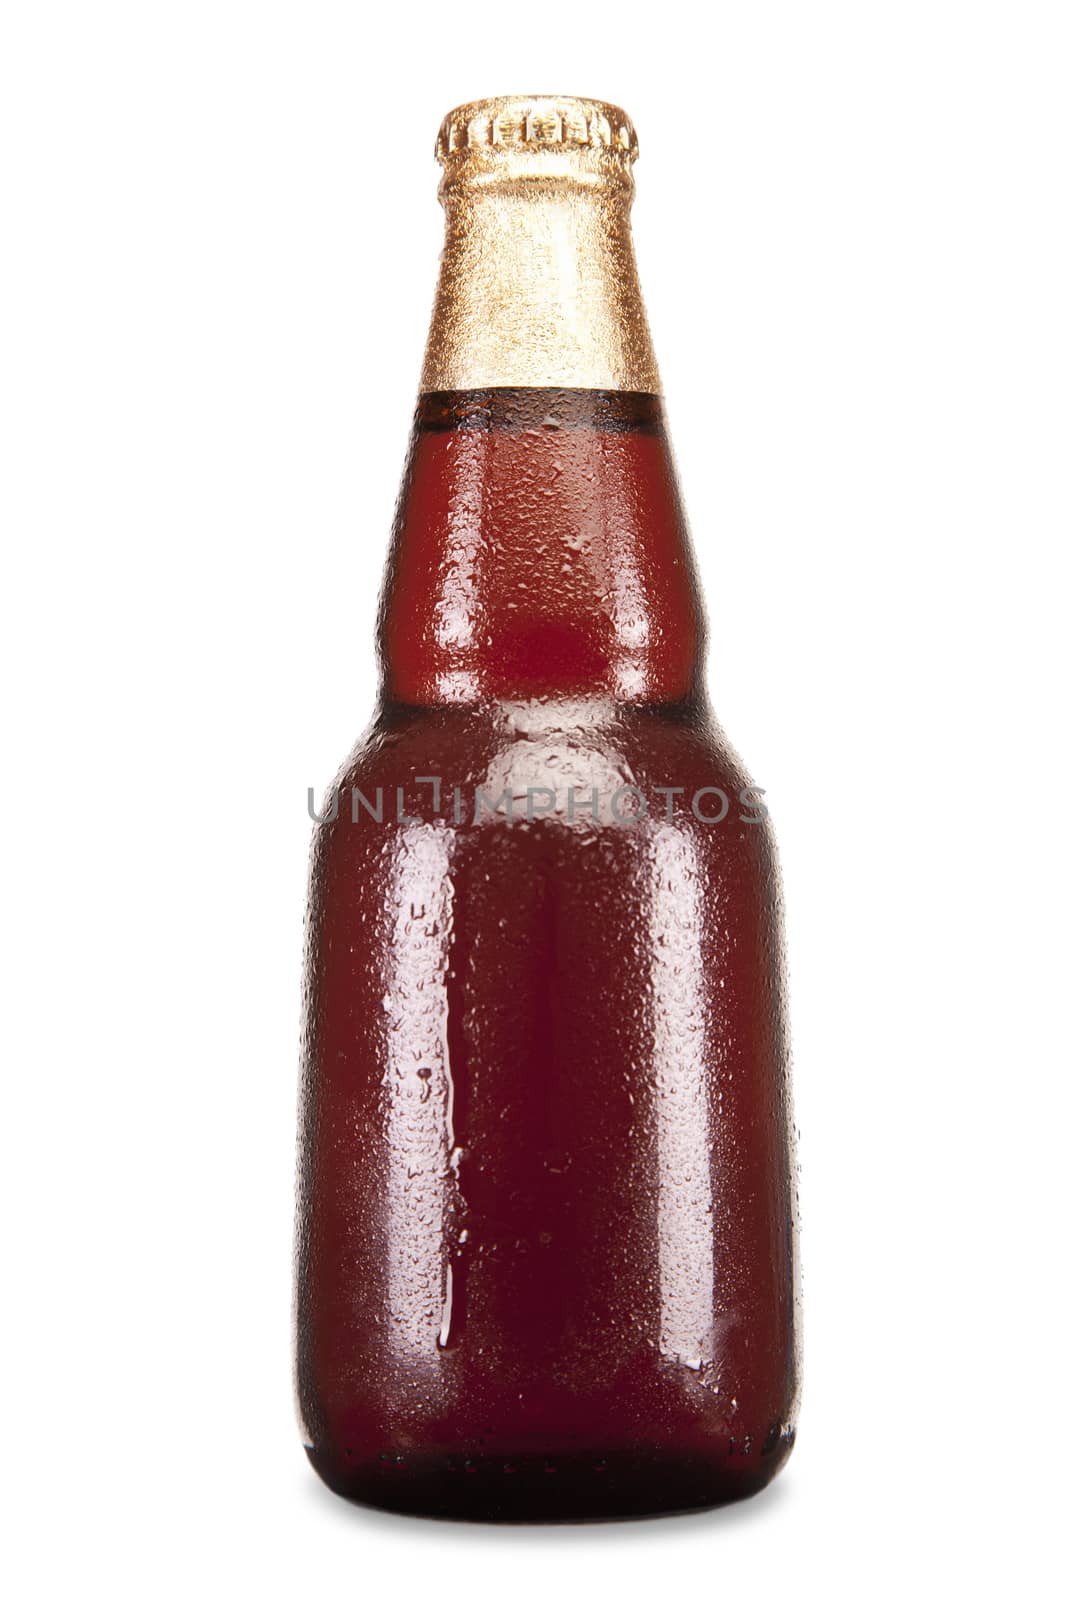 A bottle of beer isolated over a white background.